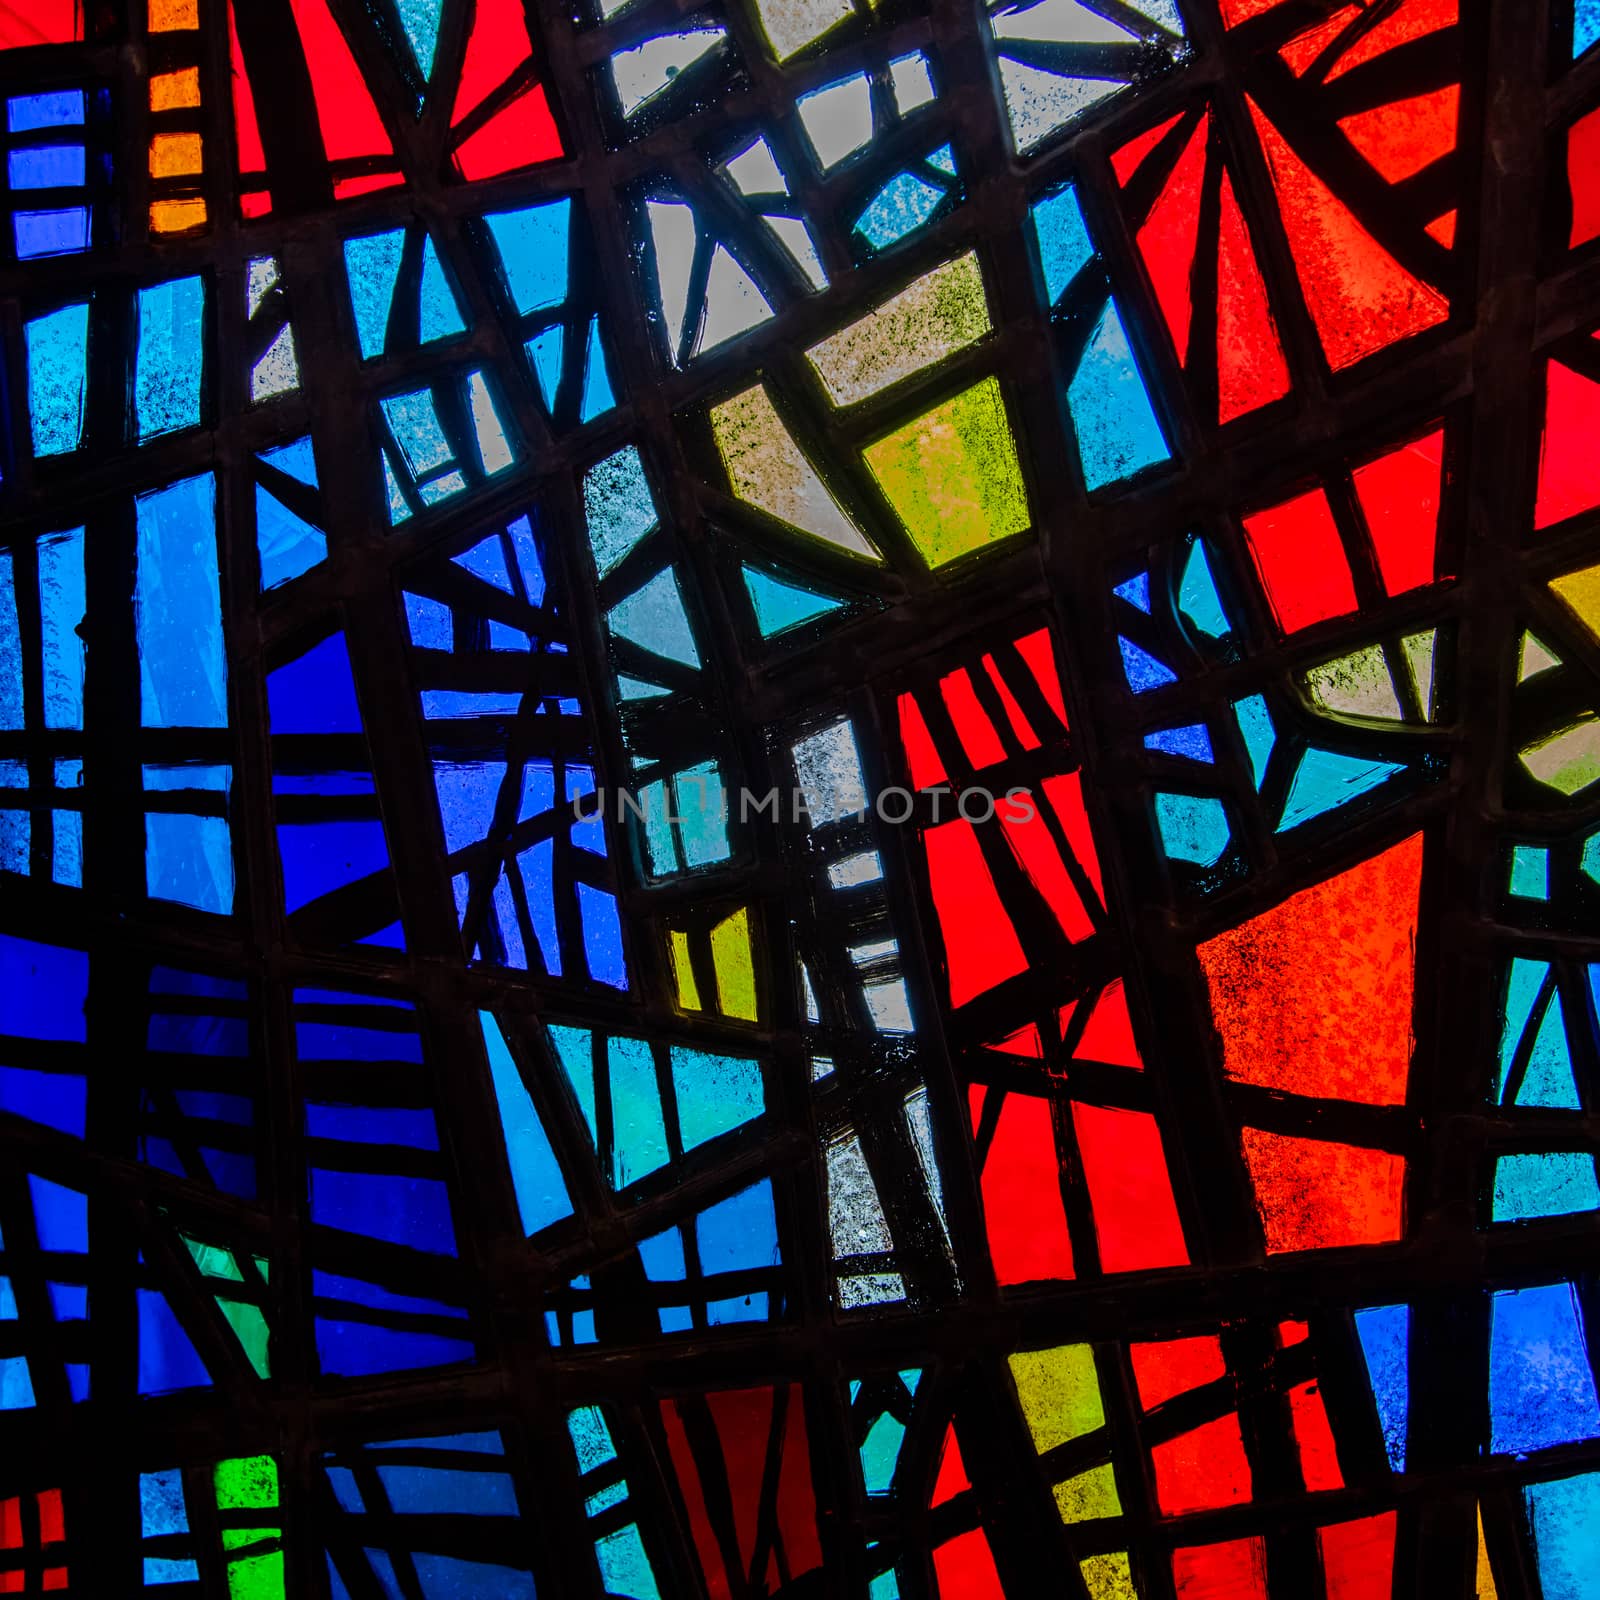 Image of a multicolored stained glass window by michaklootwijk